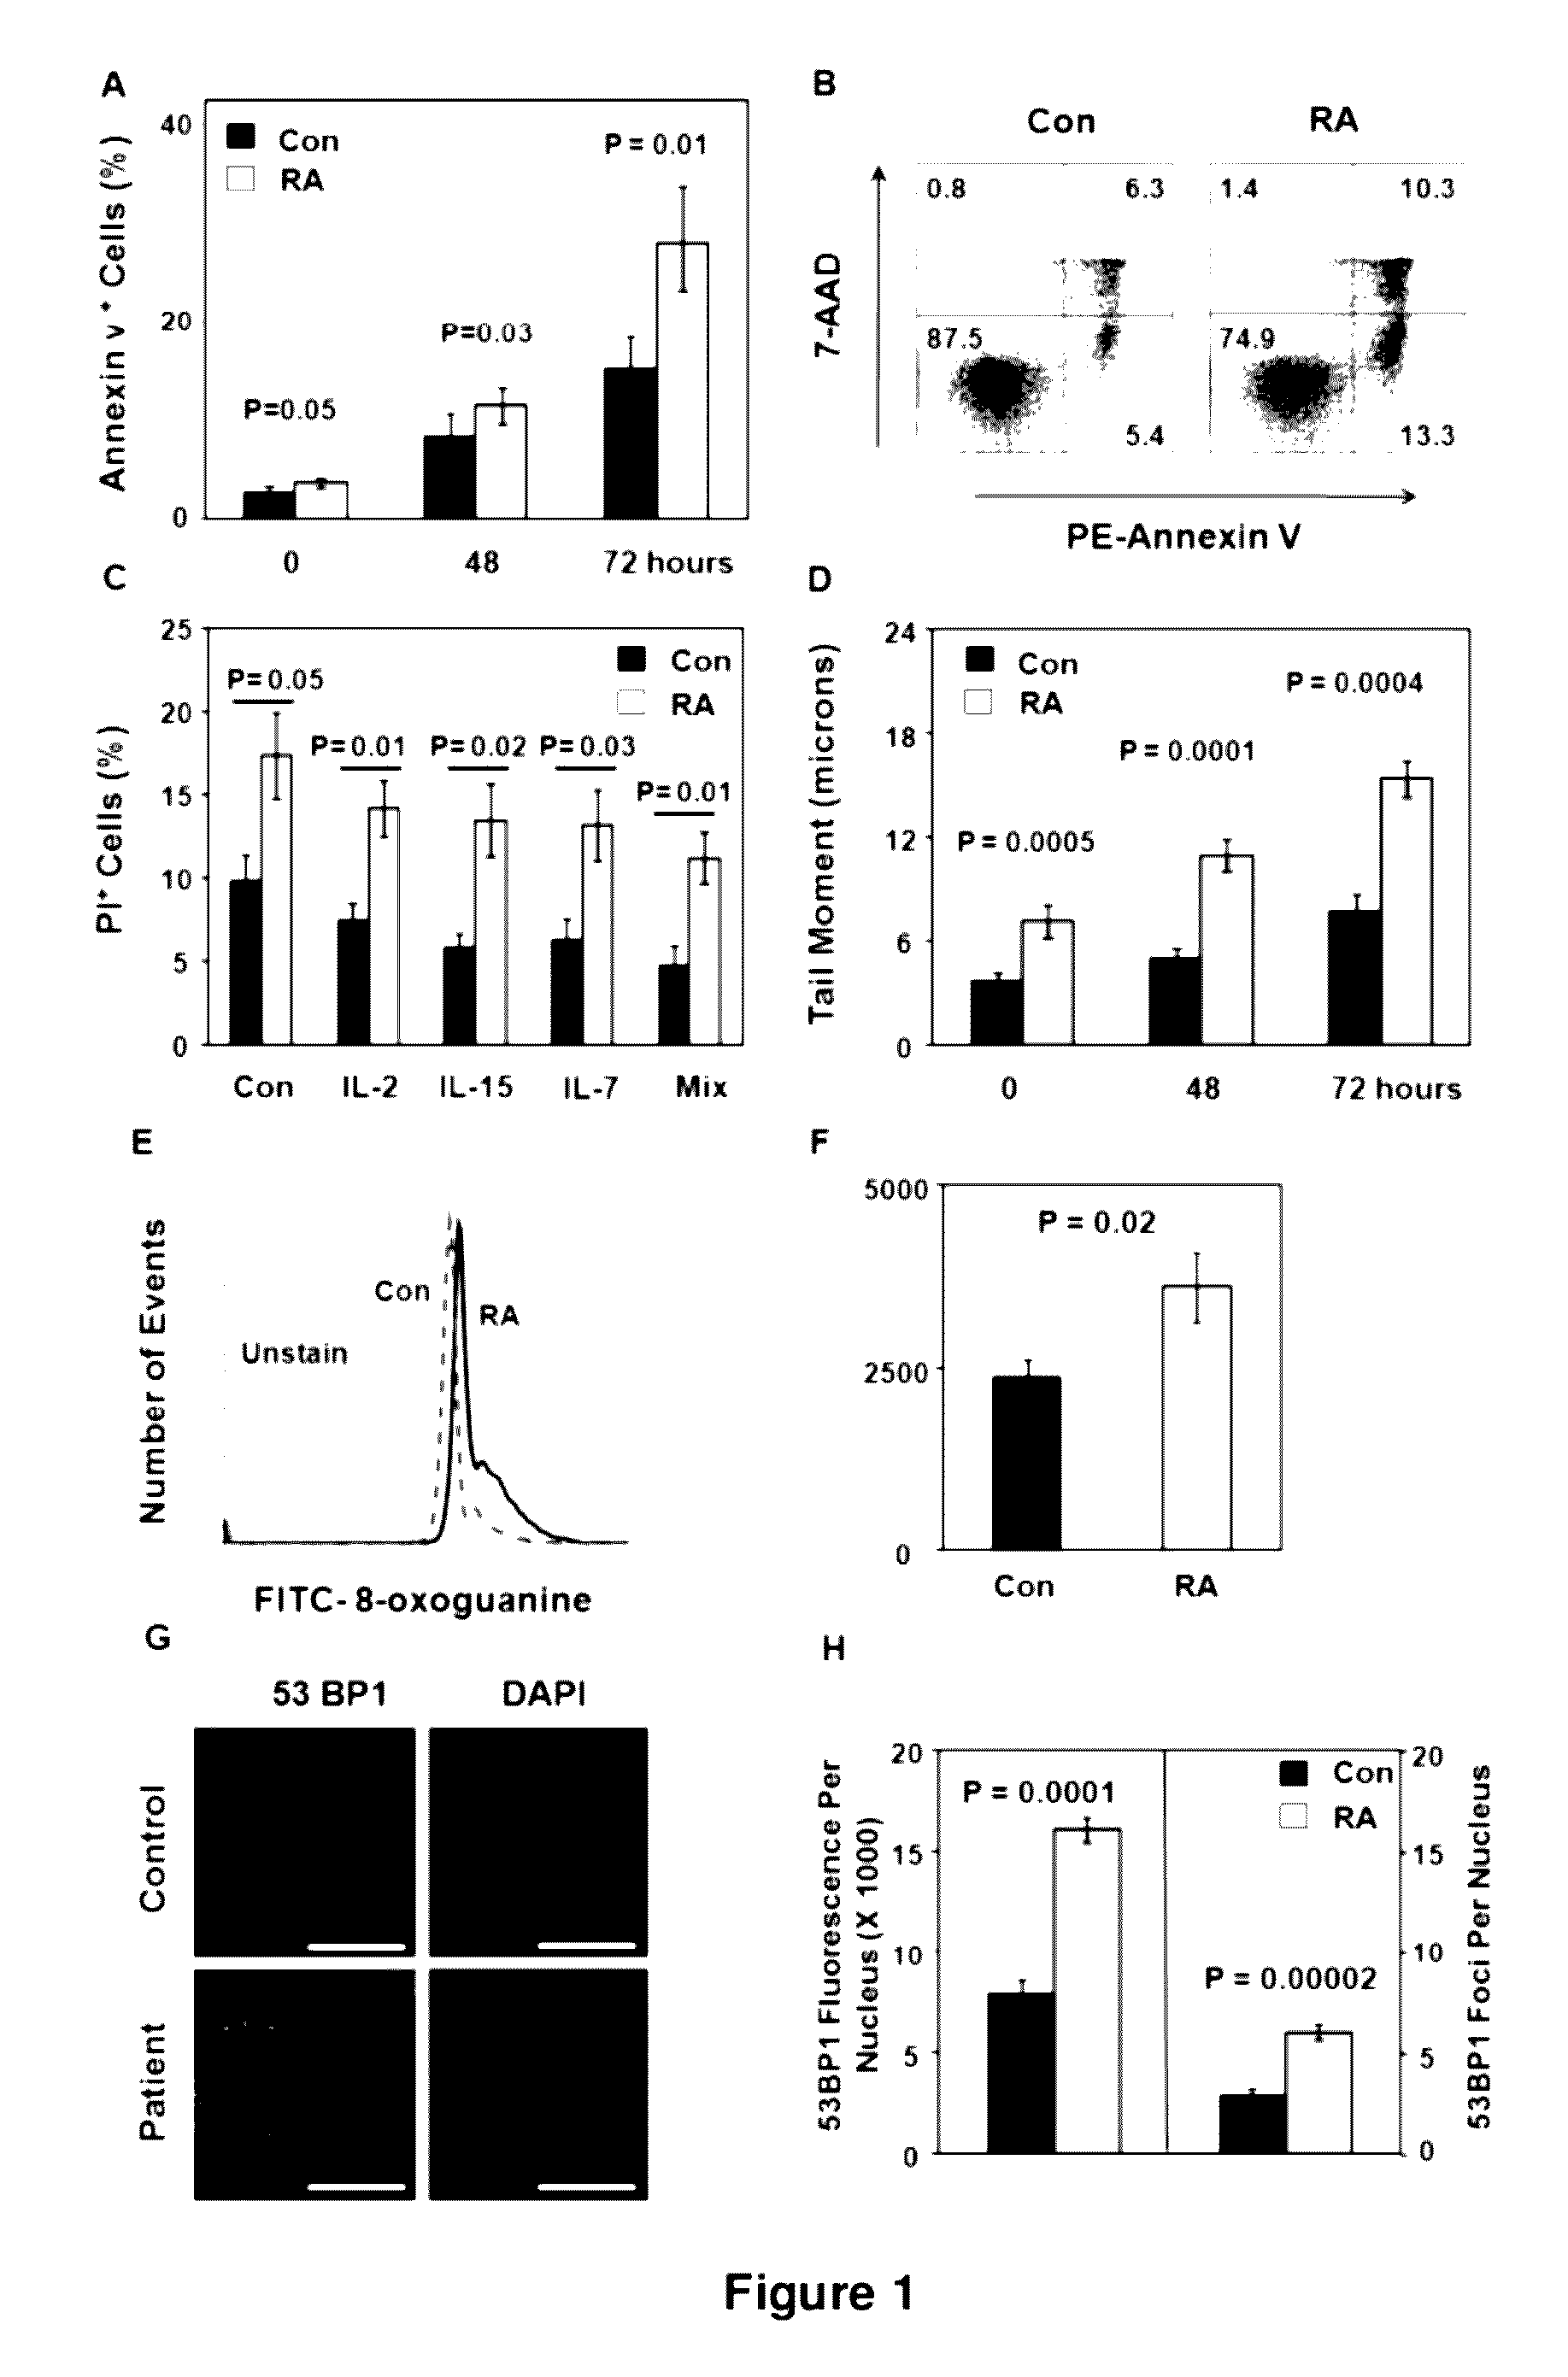 Method for improving immune system function by administering agents that inhibit DNA-dependent protein kinase-directed apoptosis